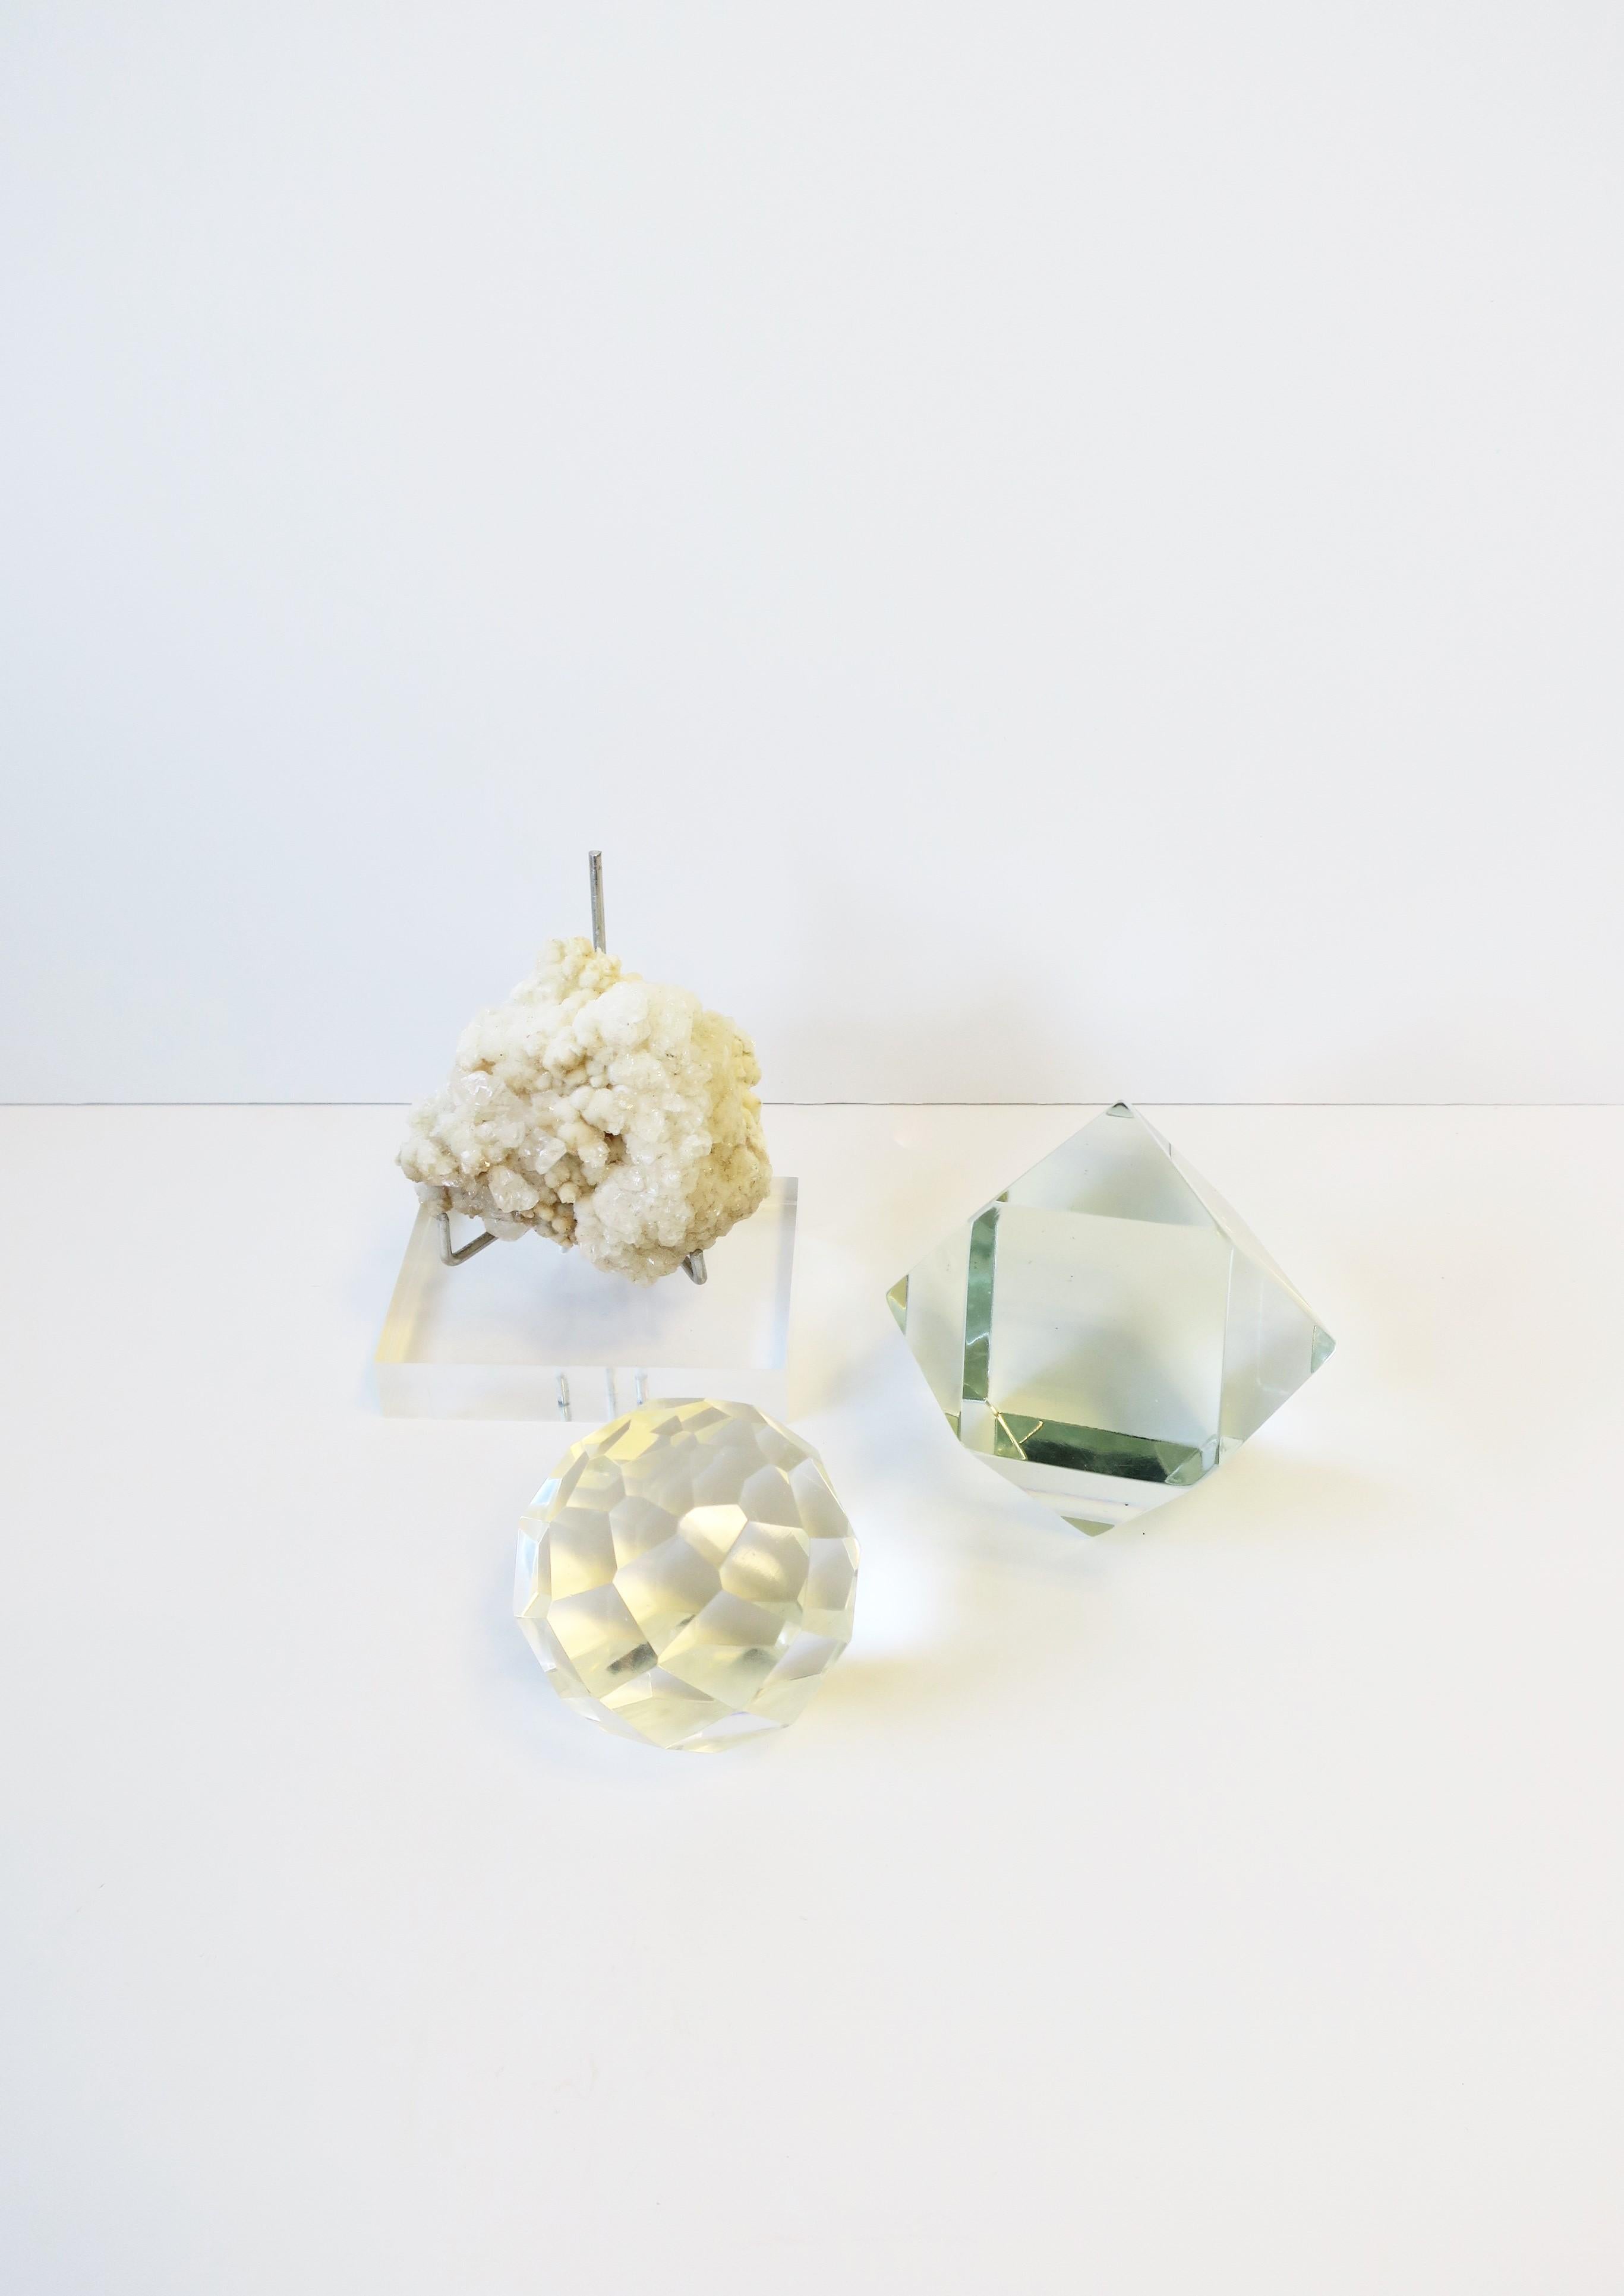 Modern Crystal Geometric Paperweight or Decorative Object For Sale